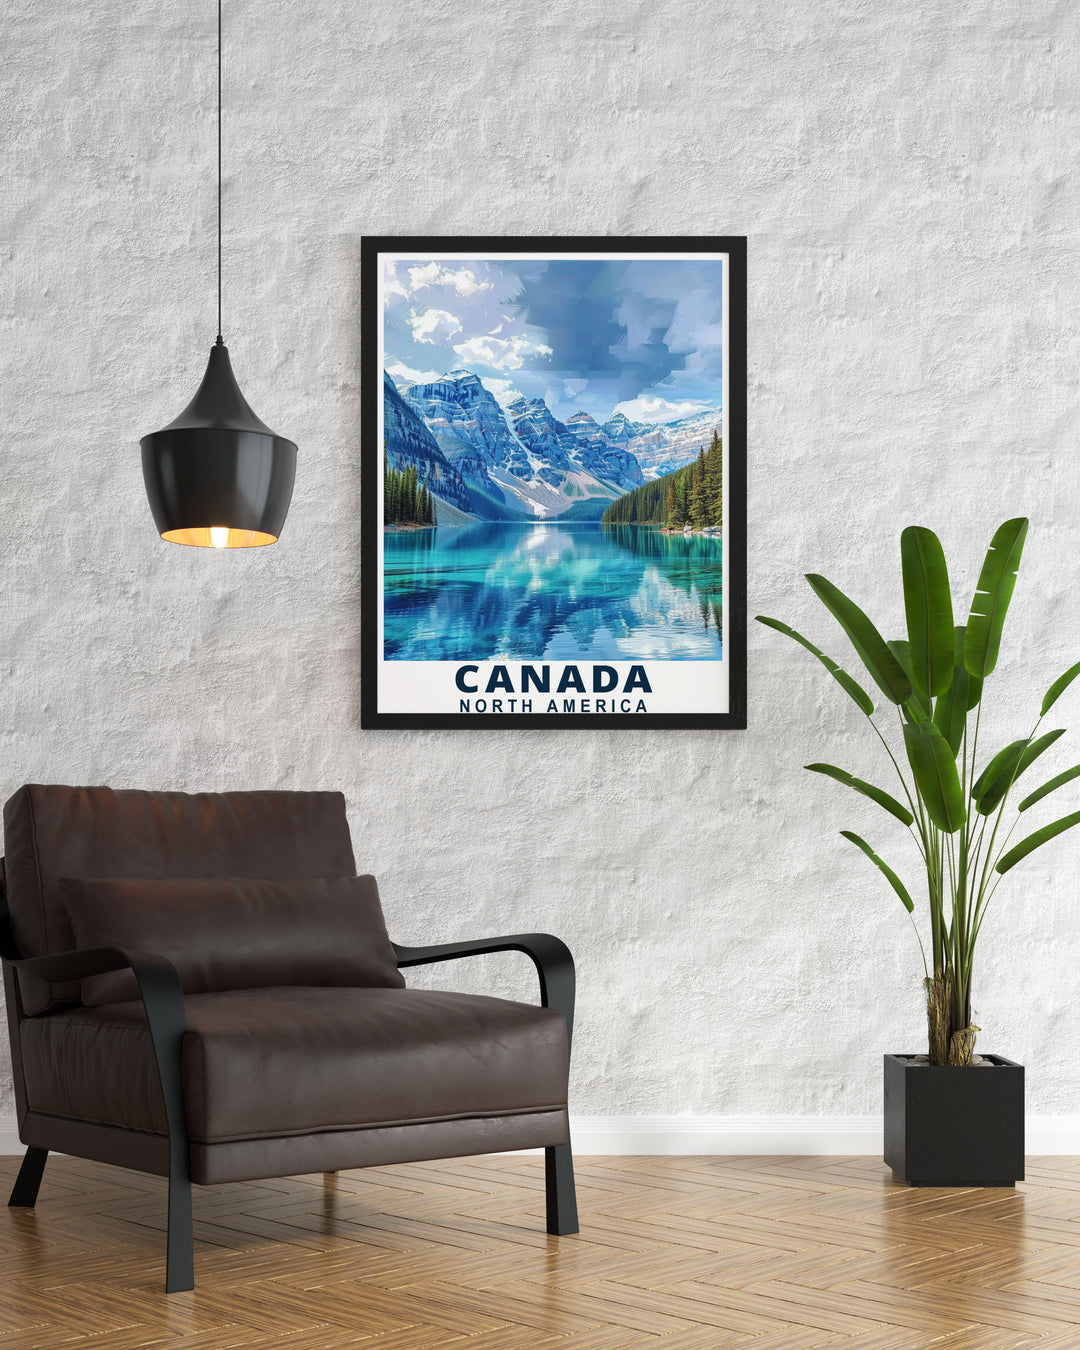 This poster showcases the enchanting landscapes of Banff National Park and the spectacular views of Lake Louise, adding a unique touch of Canadas historical and natural beauty to your living space.